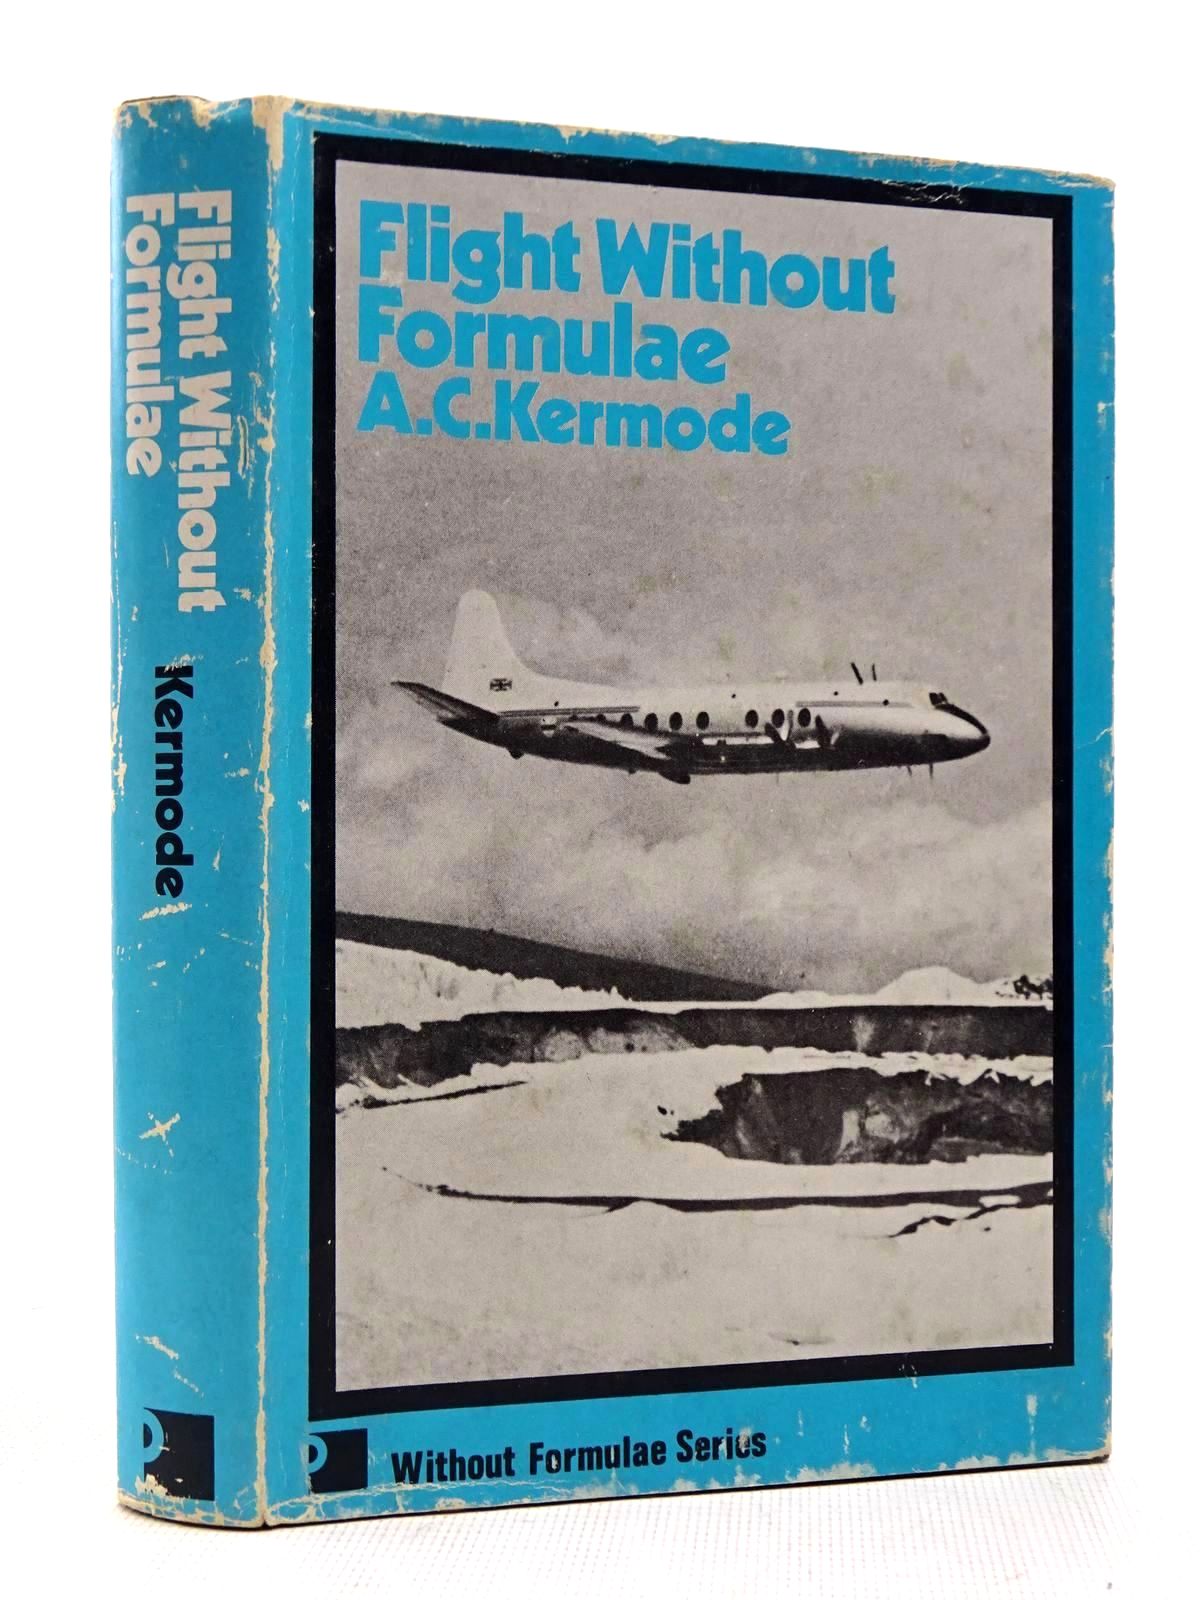 Stella & Rose's Books : FLIGHT WITHOUT FORMULAE Written By A.C. Kermode ...